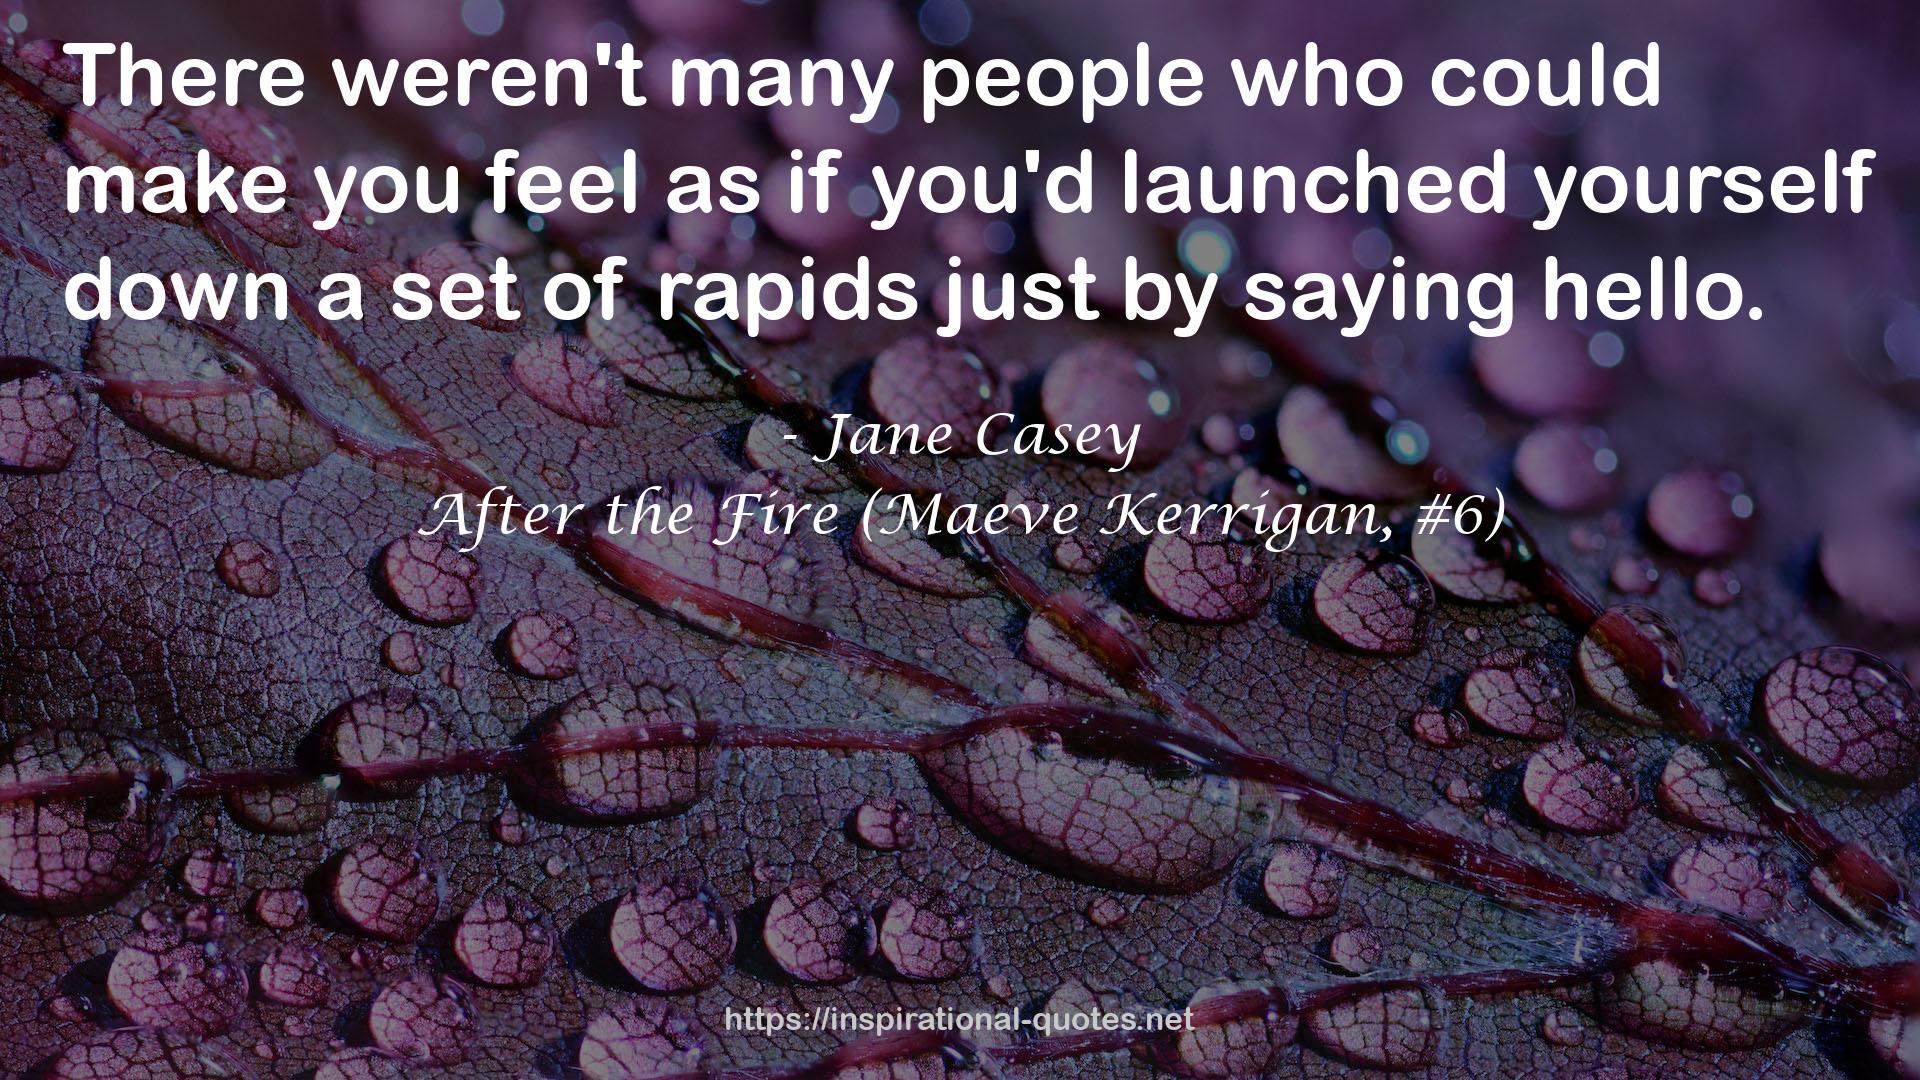 After the Fire (Maeve Kerrigan, #6) QUOTES